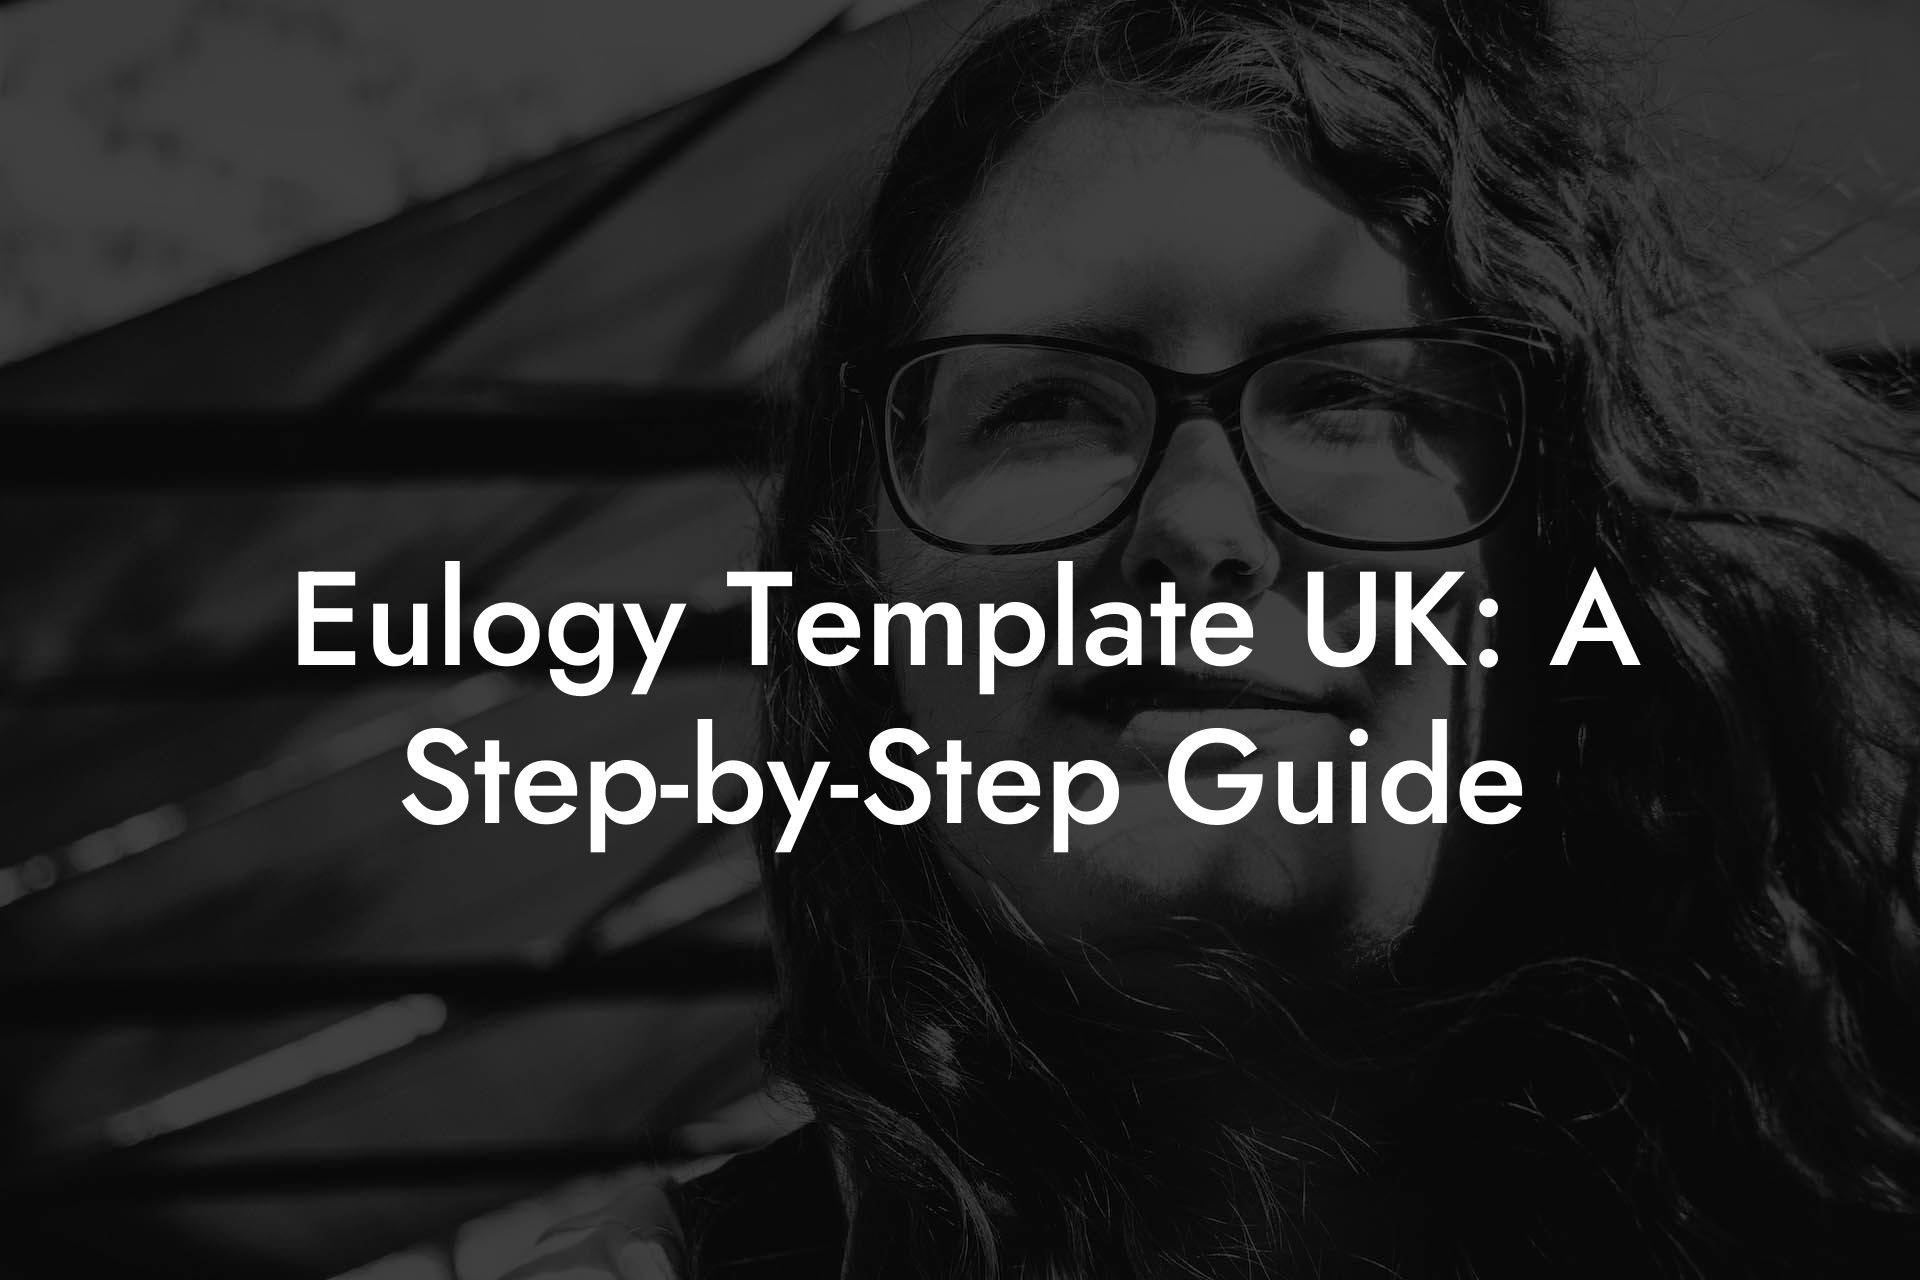 Eulogy Template UK: A Step-by-Step Guide